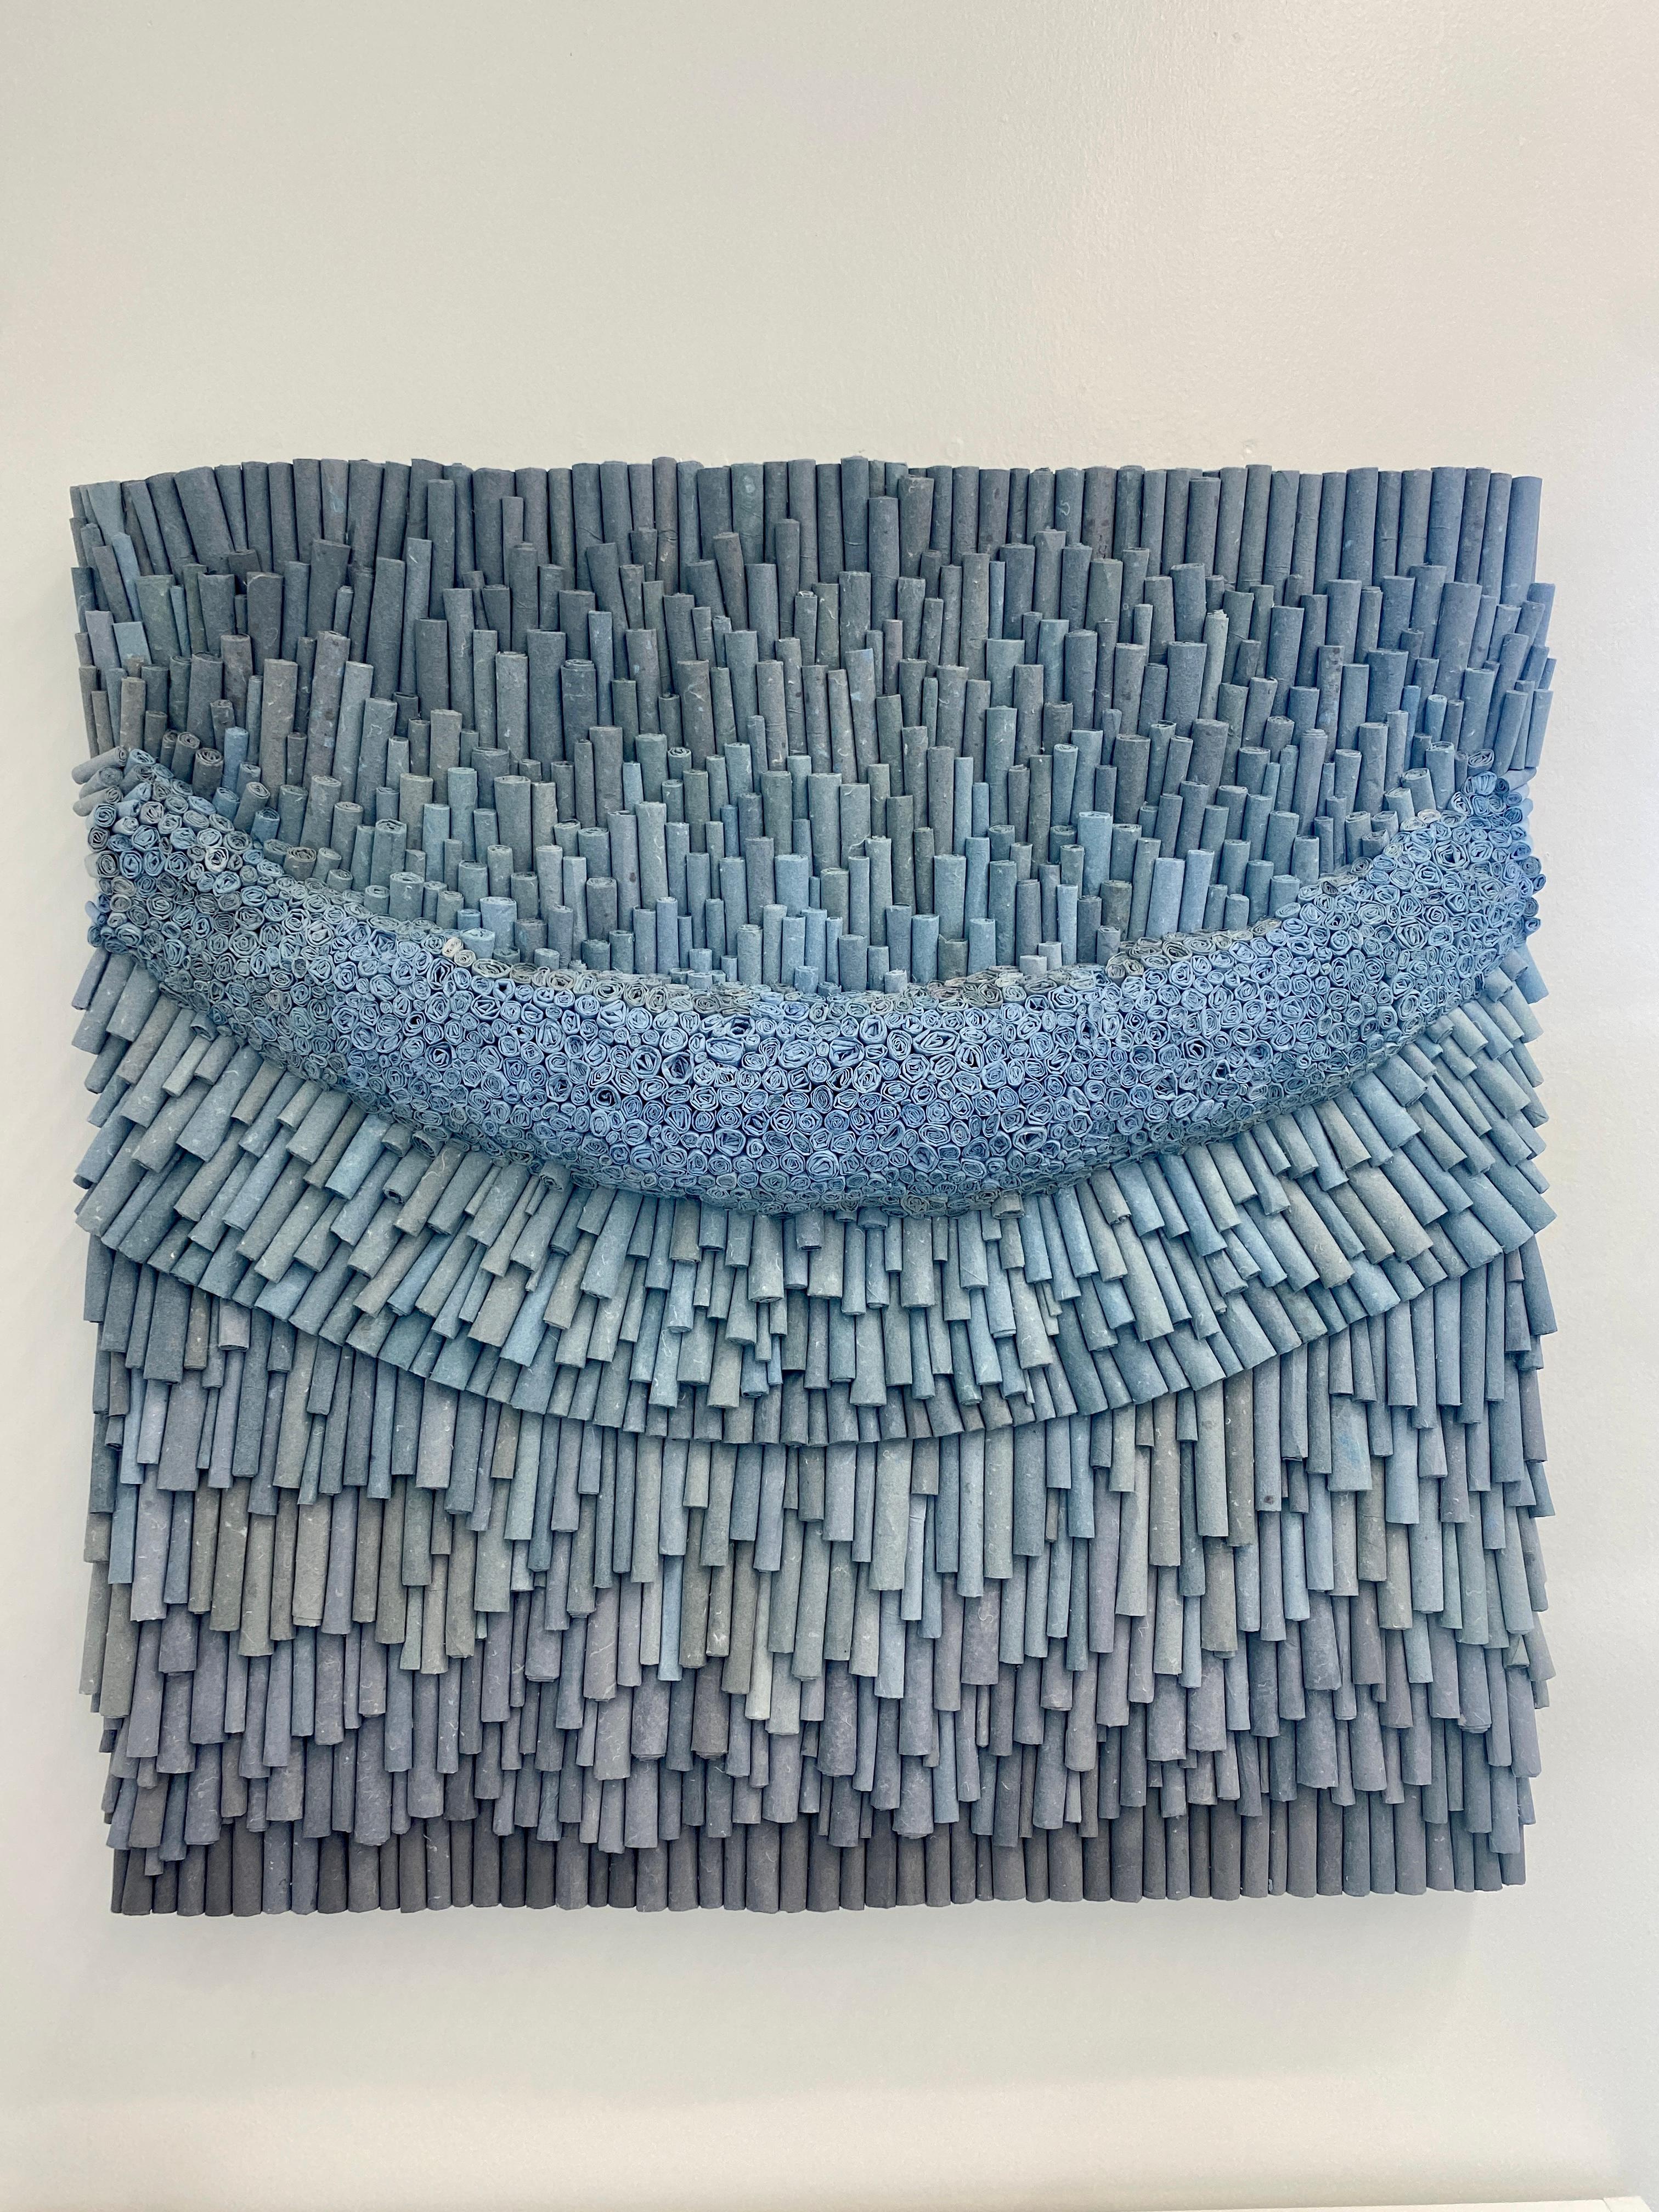 Denim, Contemporary Rolled Paper Painting, Abstract, Sculptural, Minimalism - Sculpture de Jenn Hassin